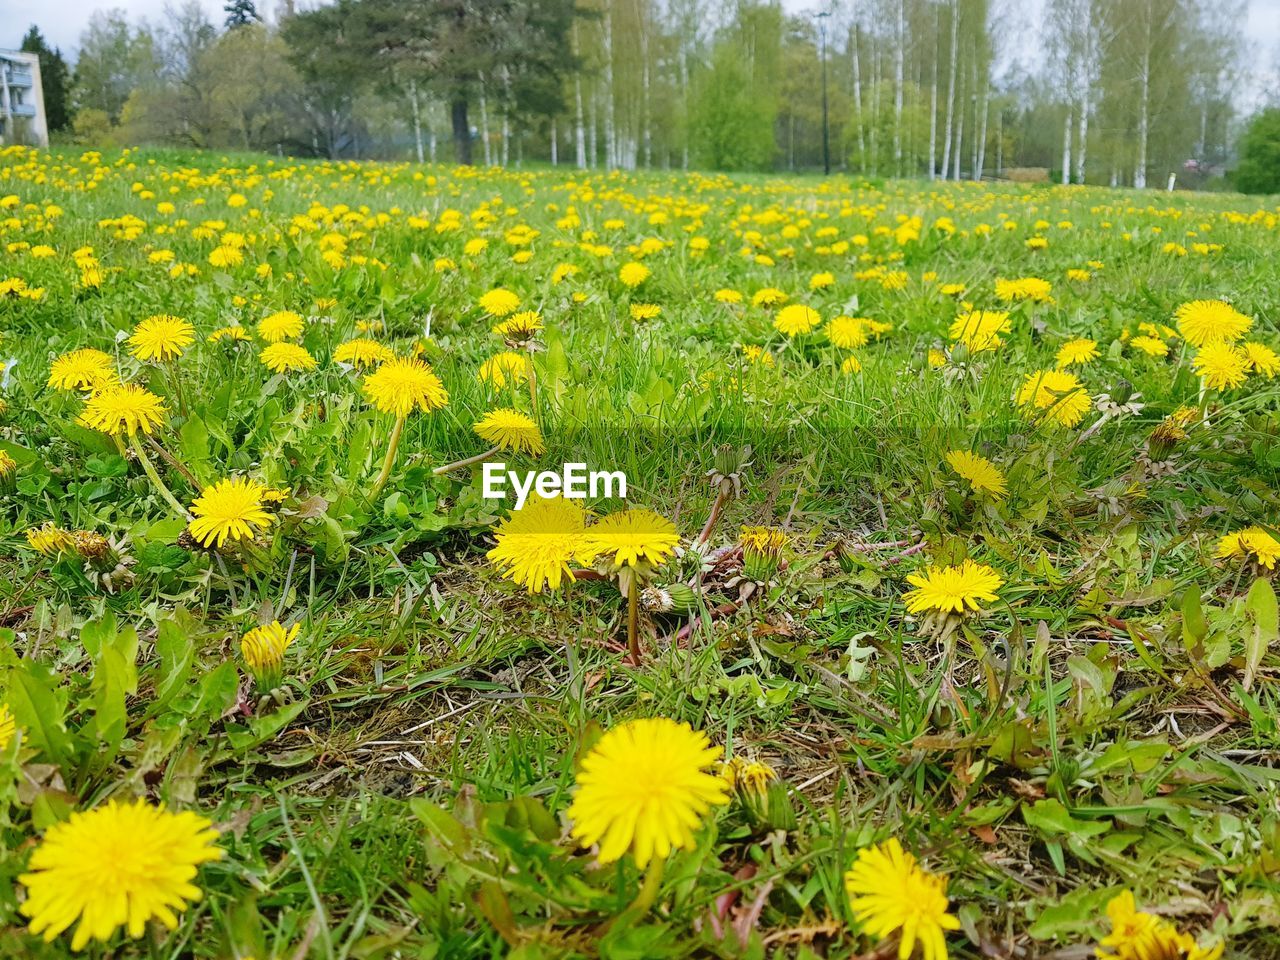 VIEW OF YELLOW FLOWERS ON FIELD